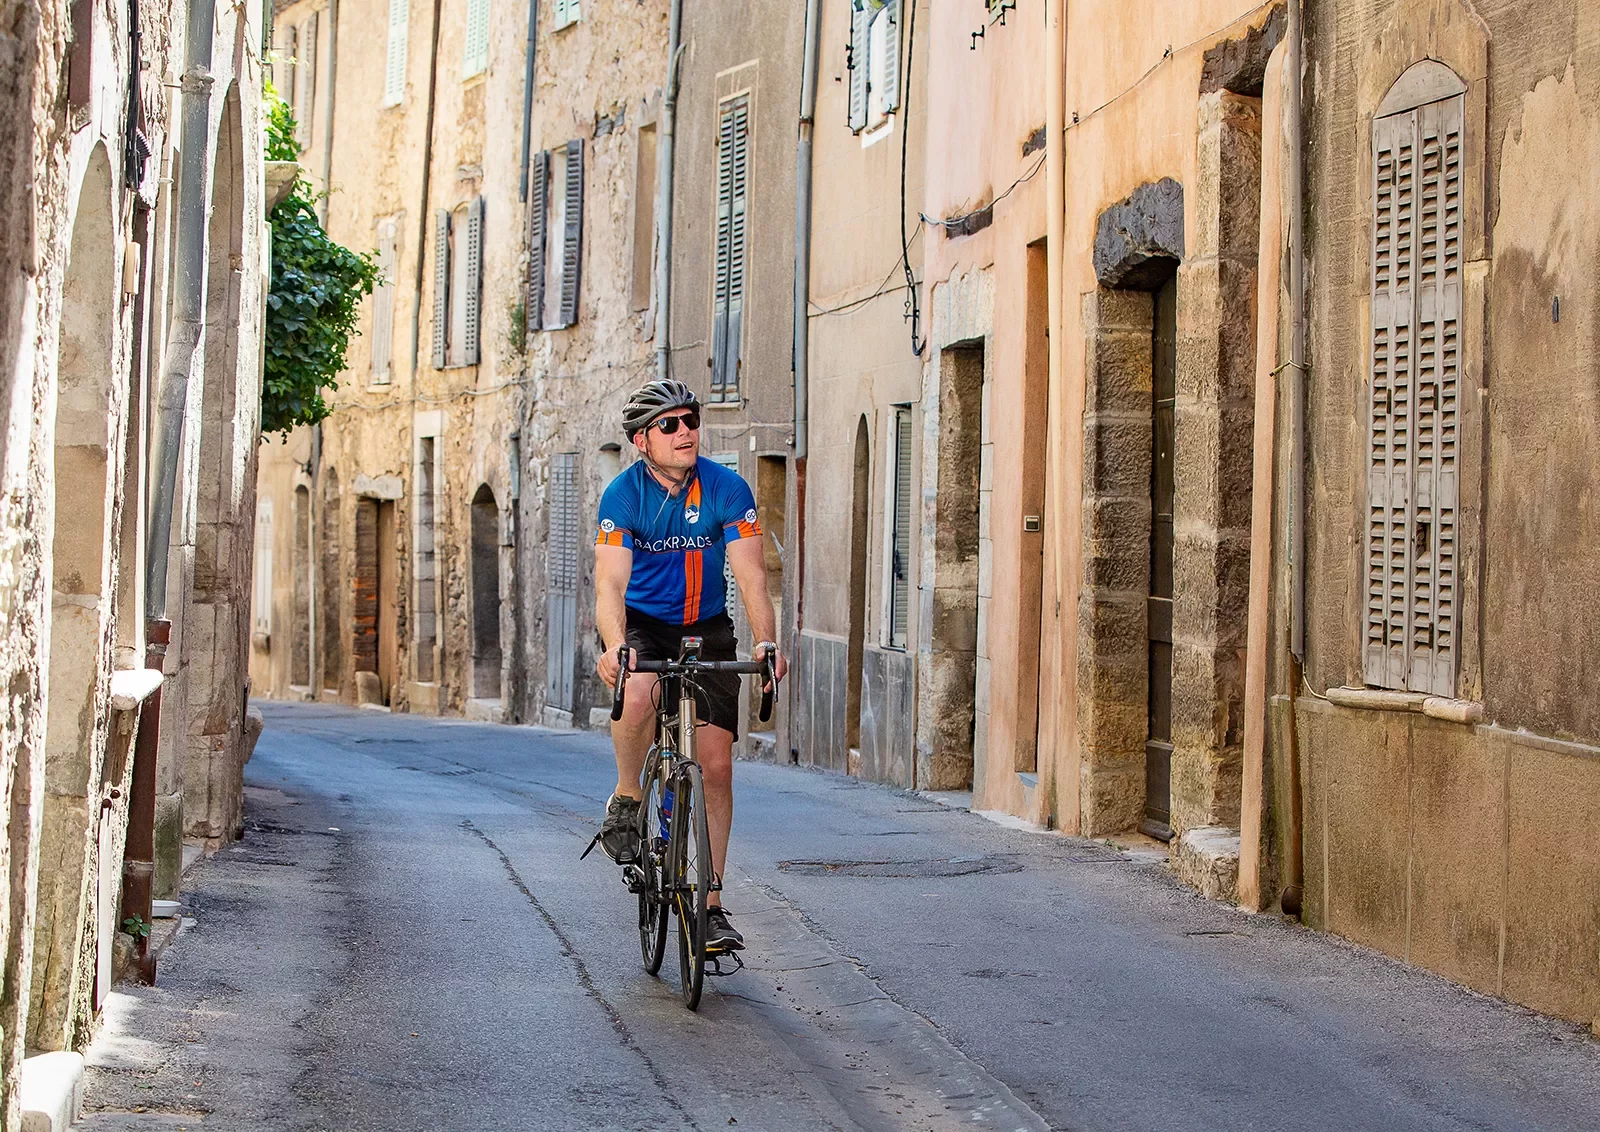 Biker riding riding through the old streets of a village in France